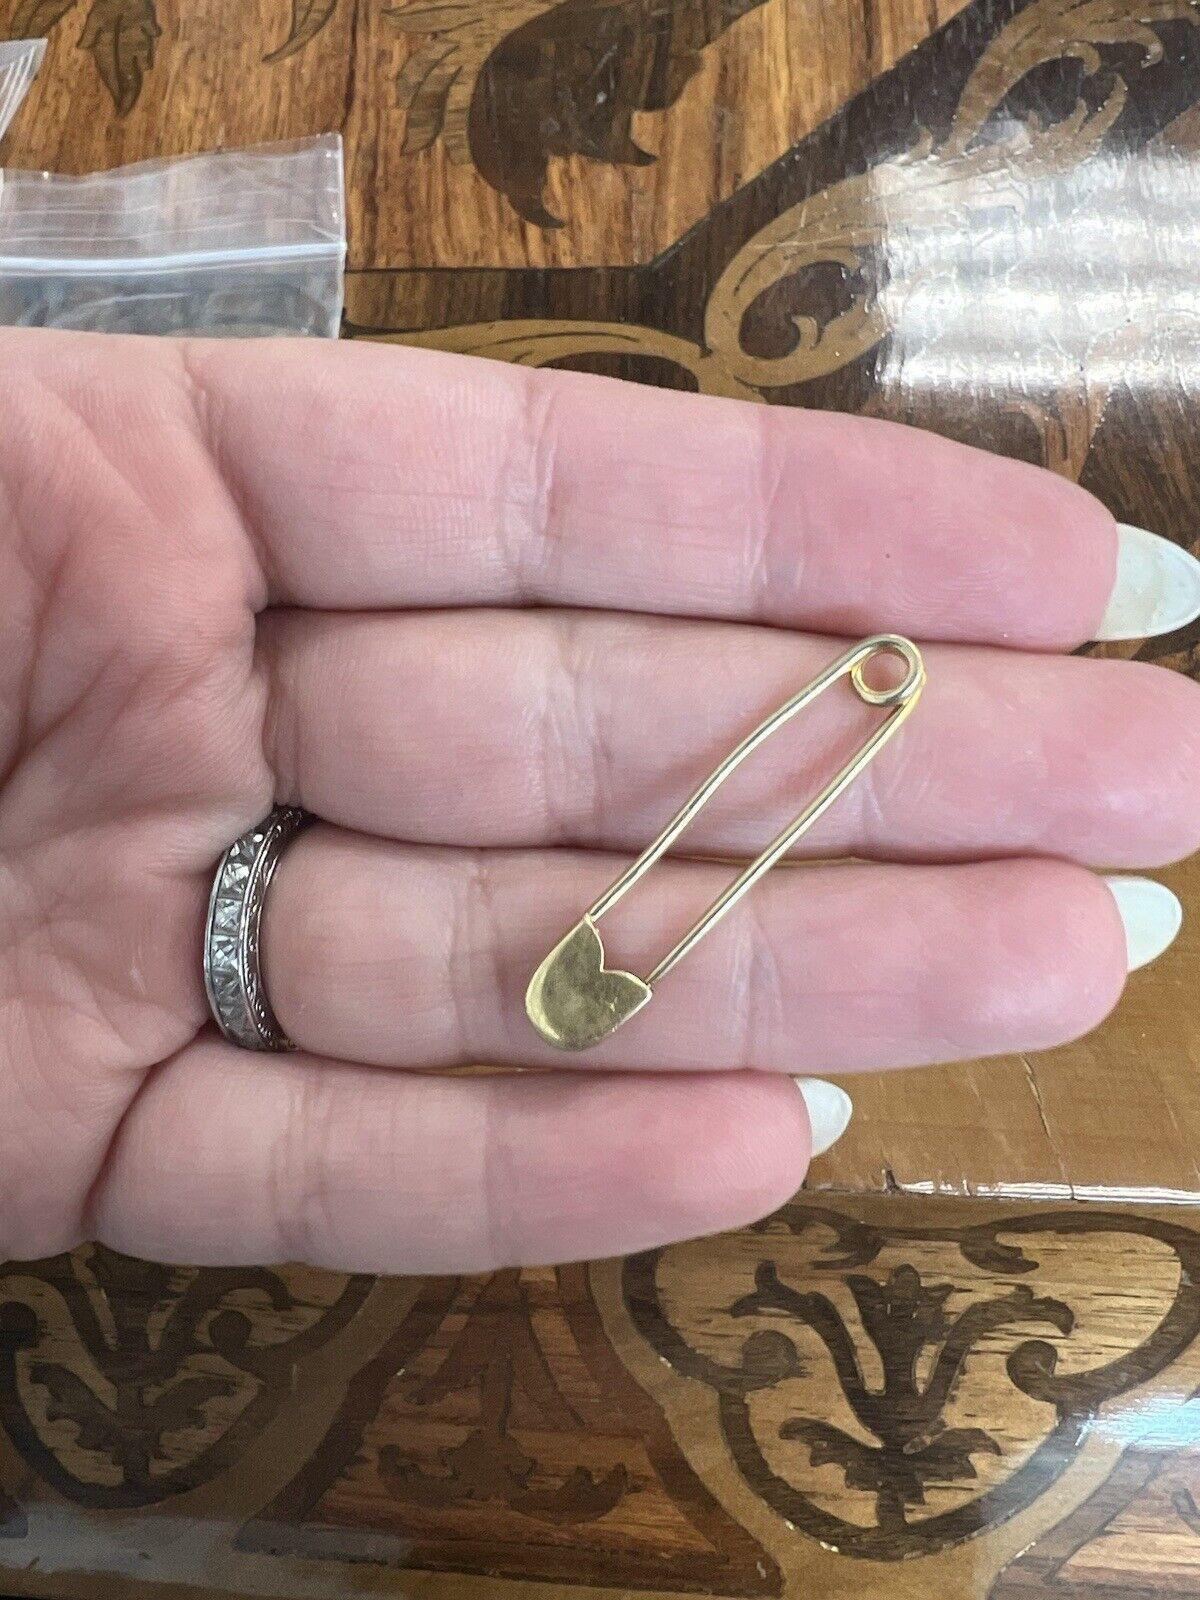 Bvlgari Italy 18k Yellow Gold Safety Pin Vintage Circa 1970s

Here is your chance to purchase a beautiful and highly collectible designer safety pin.  

Vintage Bvlgari Italy 18k yellow gold safety pin circa 1970s.  The weight is 1.7 grams, the